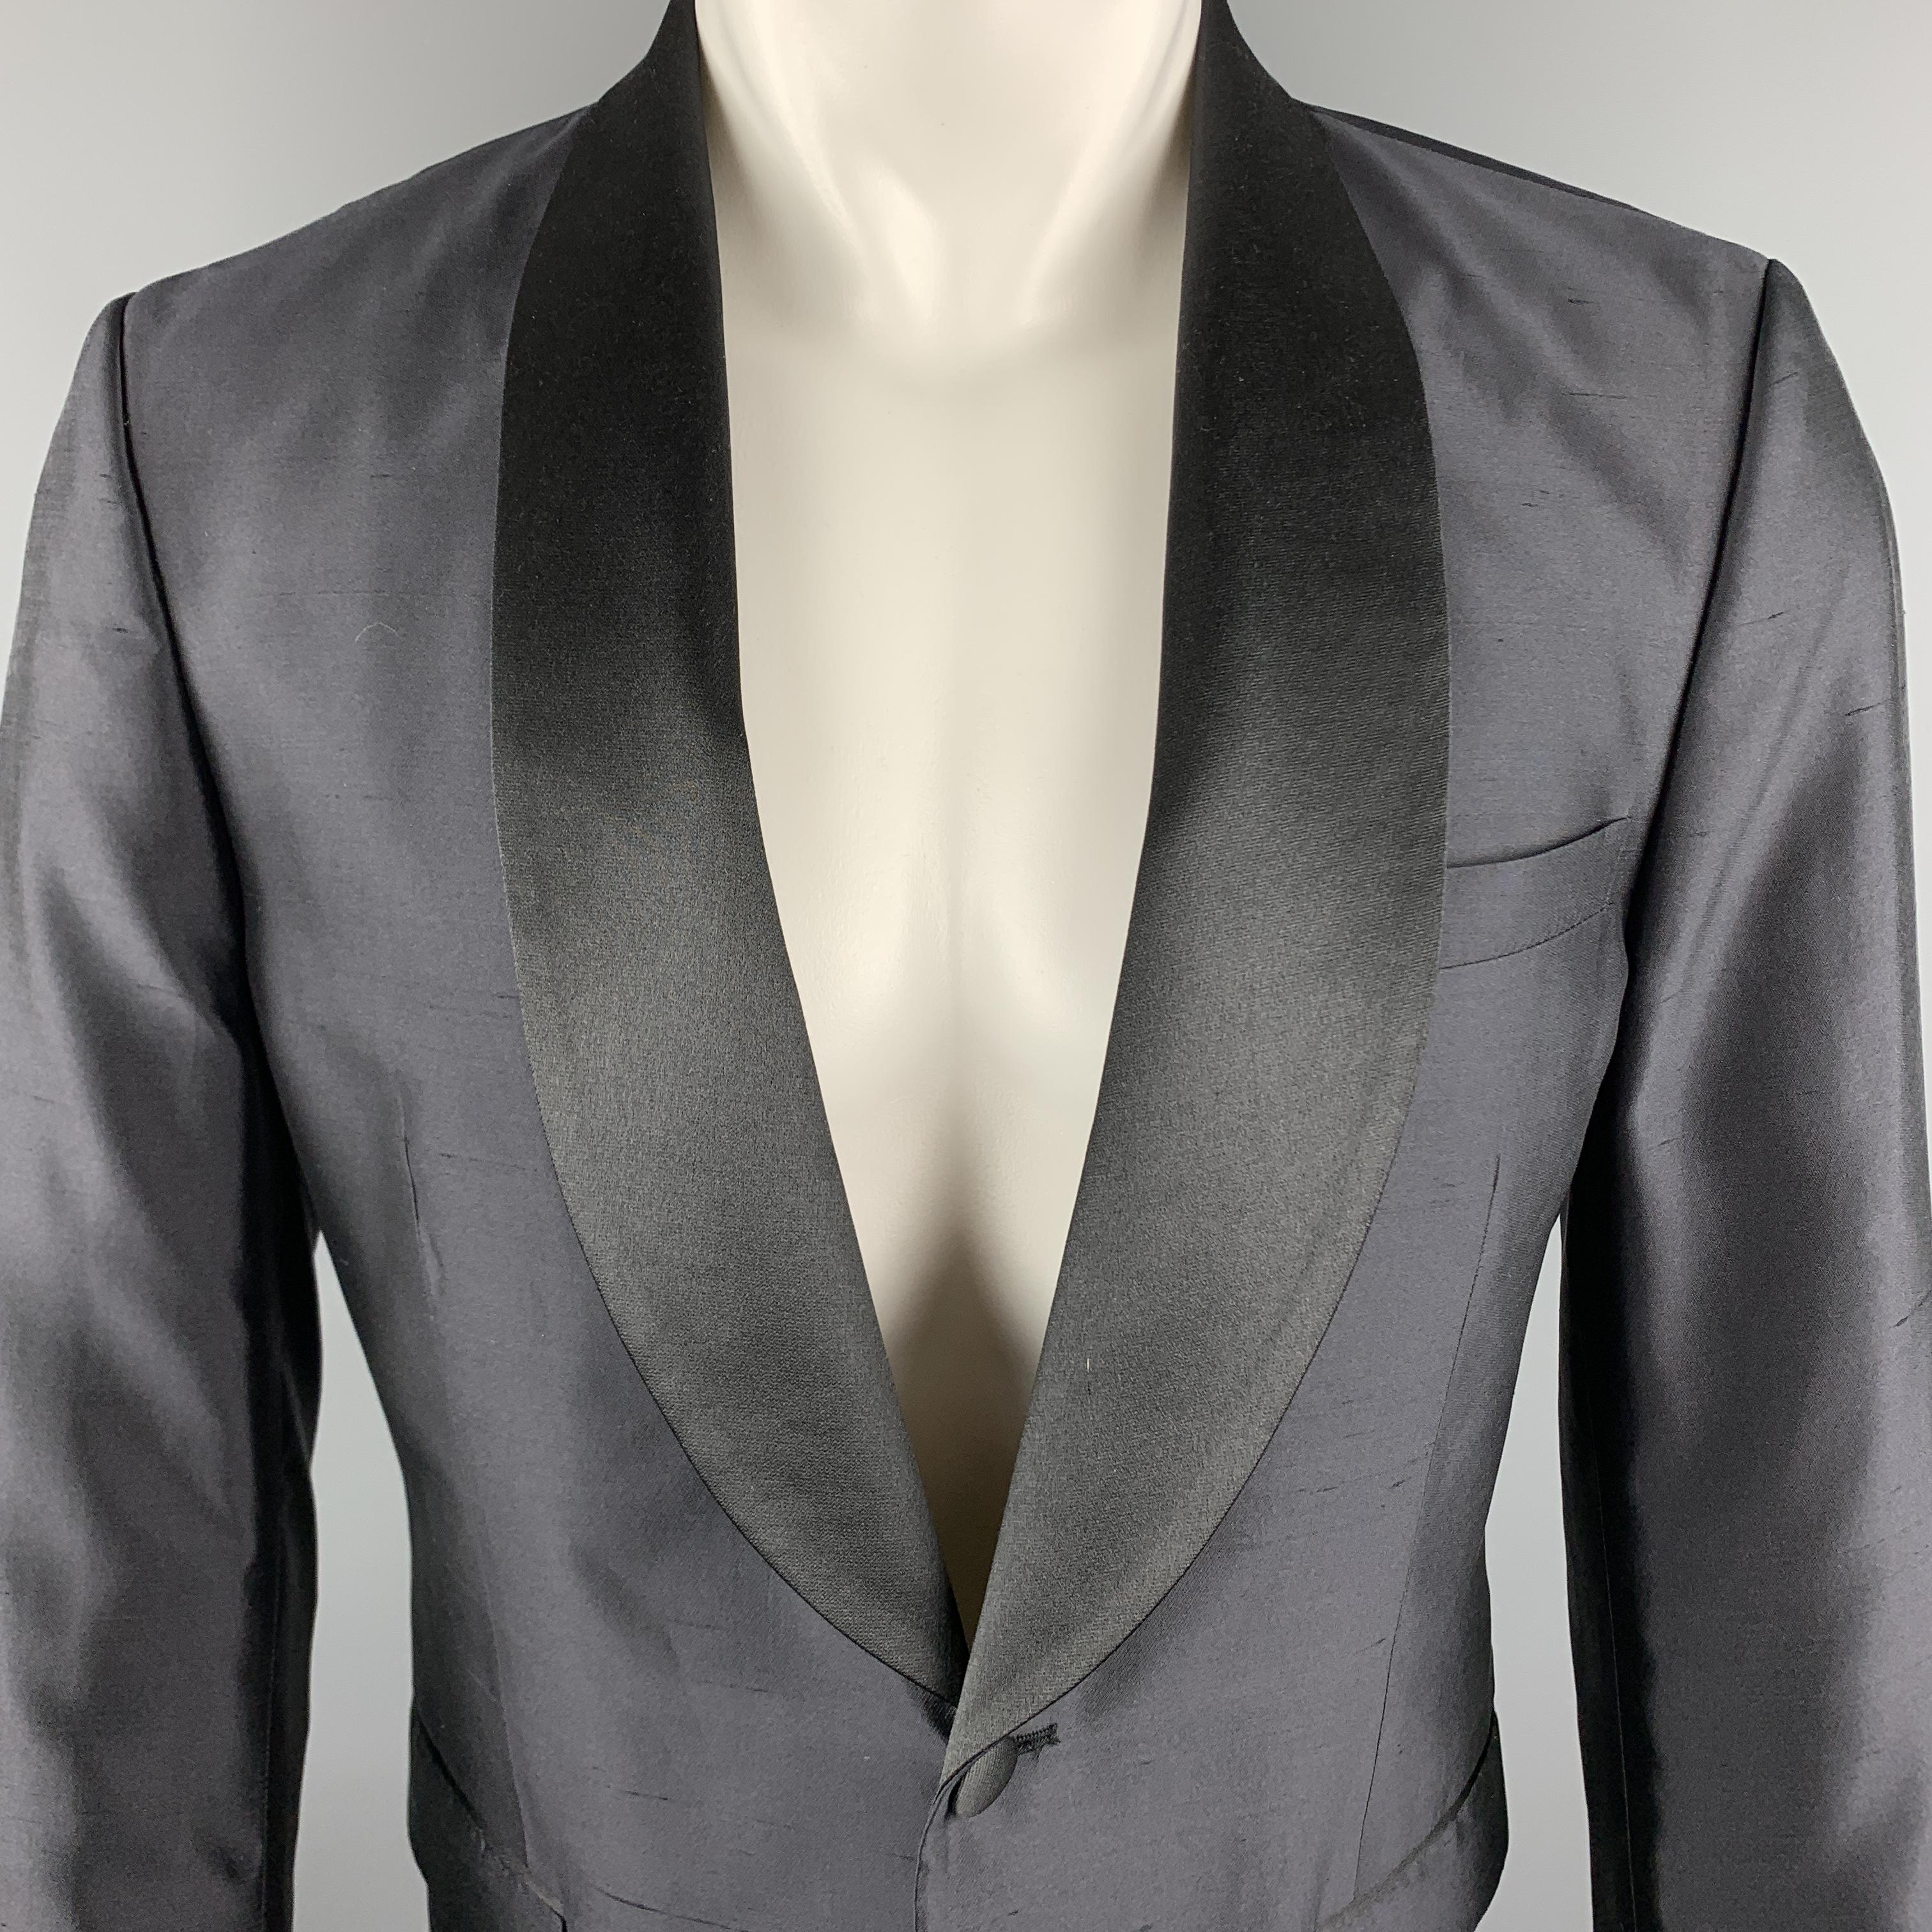 TIGER OF SWEDEN Tuxedo Sport Coat comes in a black silk material, with a satin shawl collar, slit pockets, a single button at closure, single breasted, with a single button at cuffs and a single vent at back. Made in Romania. 

Excellent Pre-Owned